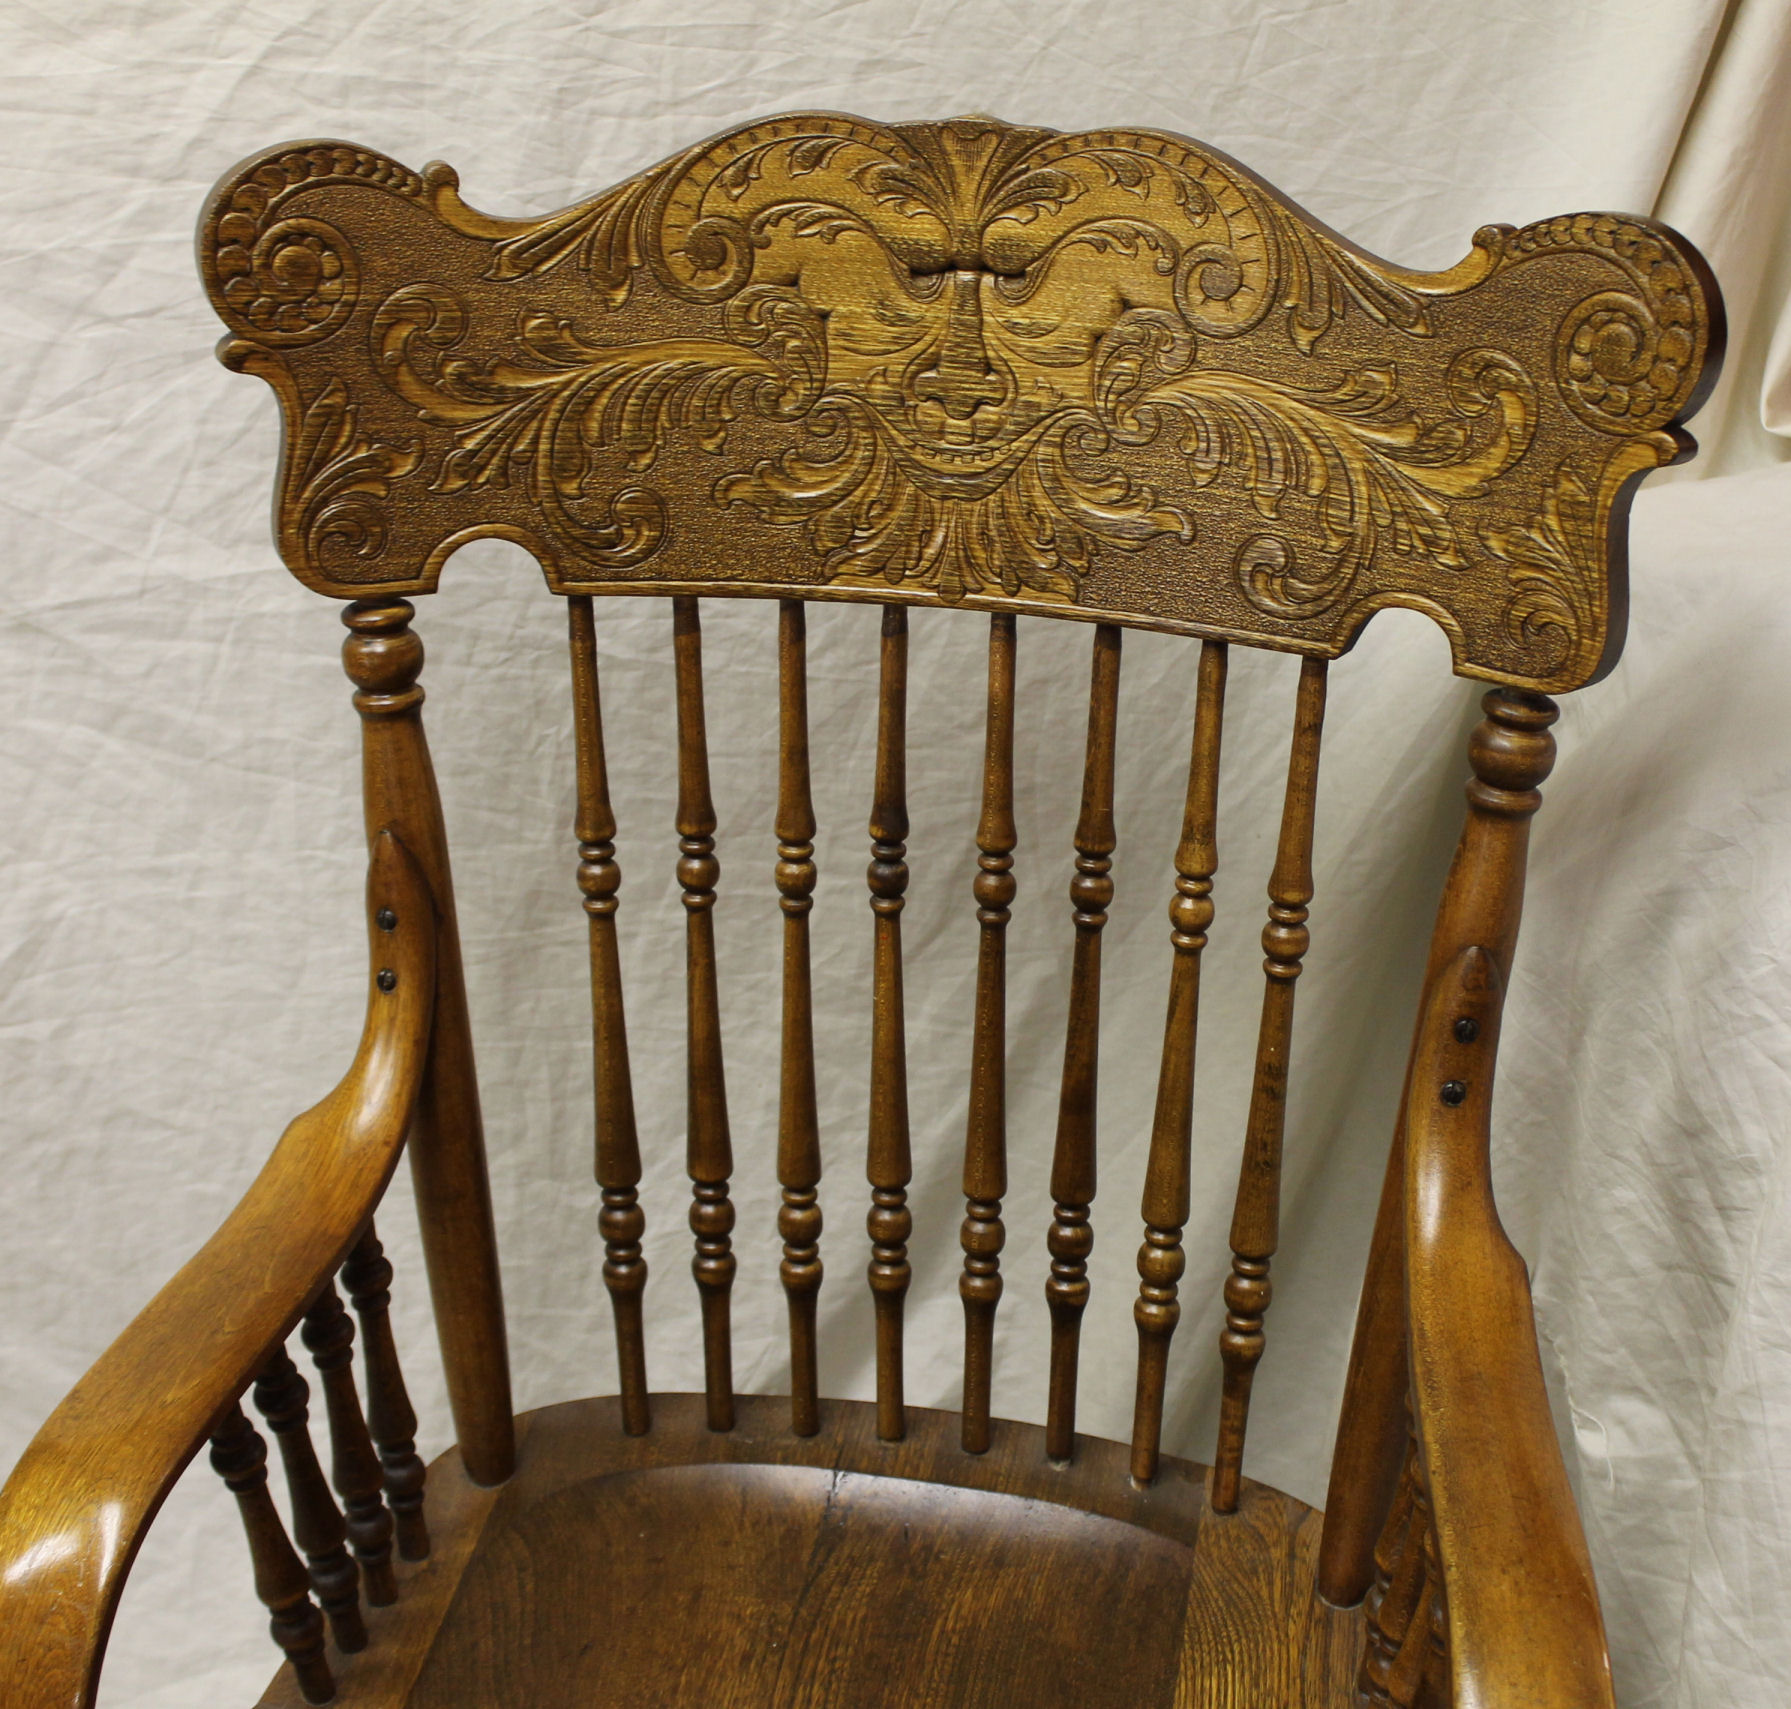 Bargain John S Antiques Armed Office Chair With Old Man Winter